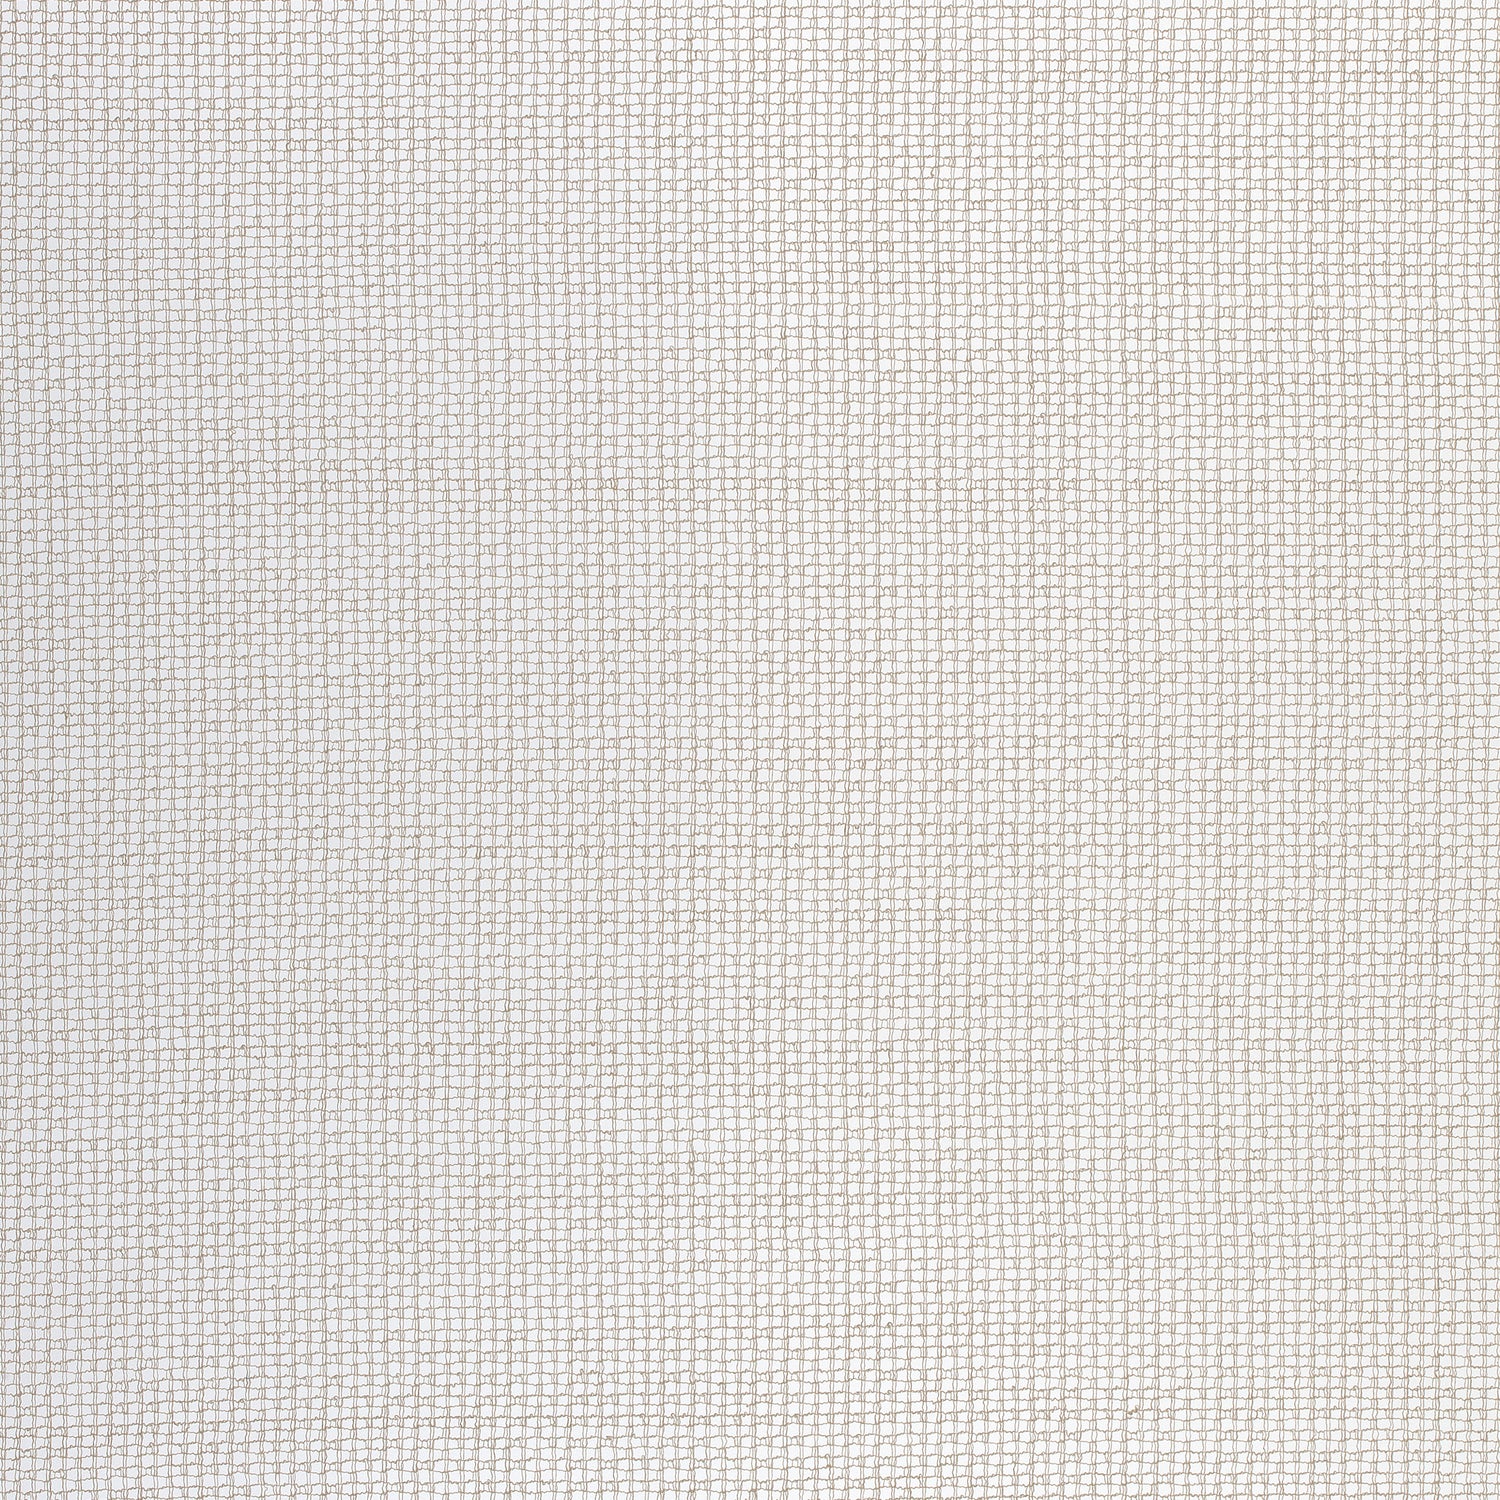 Carballo fabric in ivory color - pattern number FWW7105 - by Thibaut in the Atmosphere collection